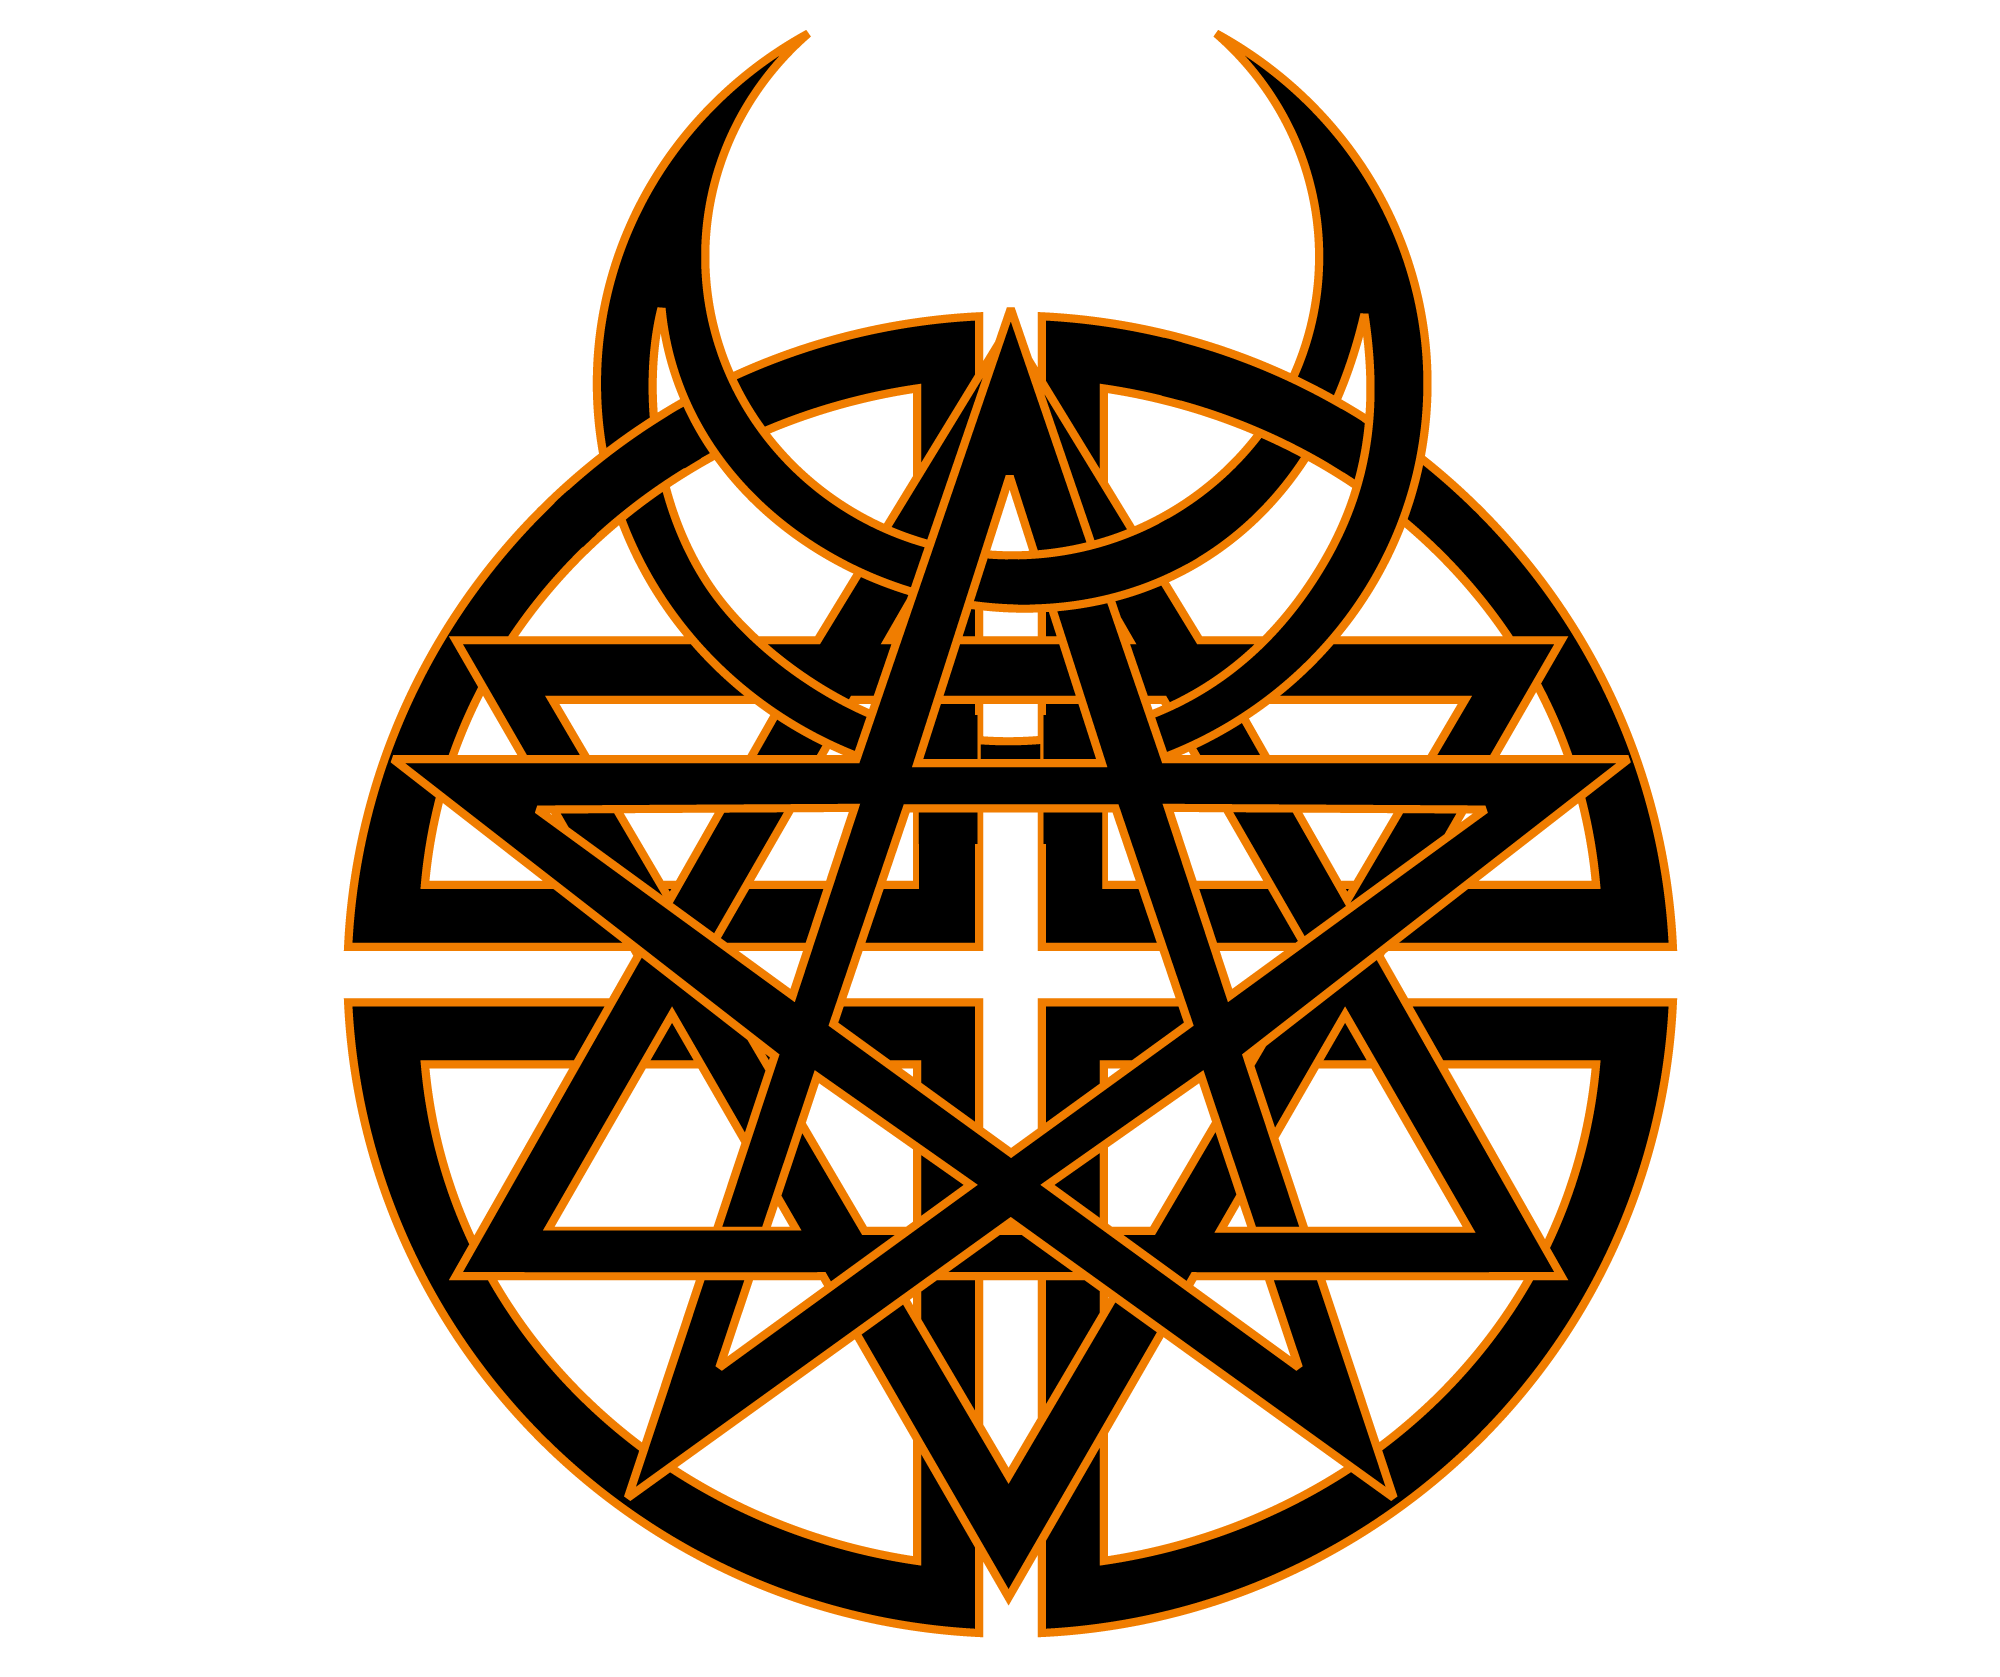 Disturbed Band Logo - Disturbed Logo, Disturbed Symbol, Meaning, History and Evolution